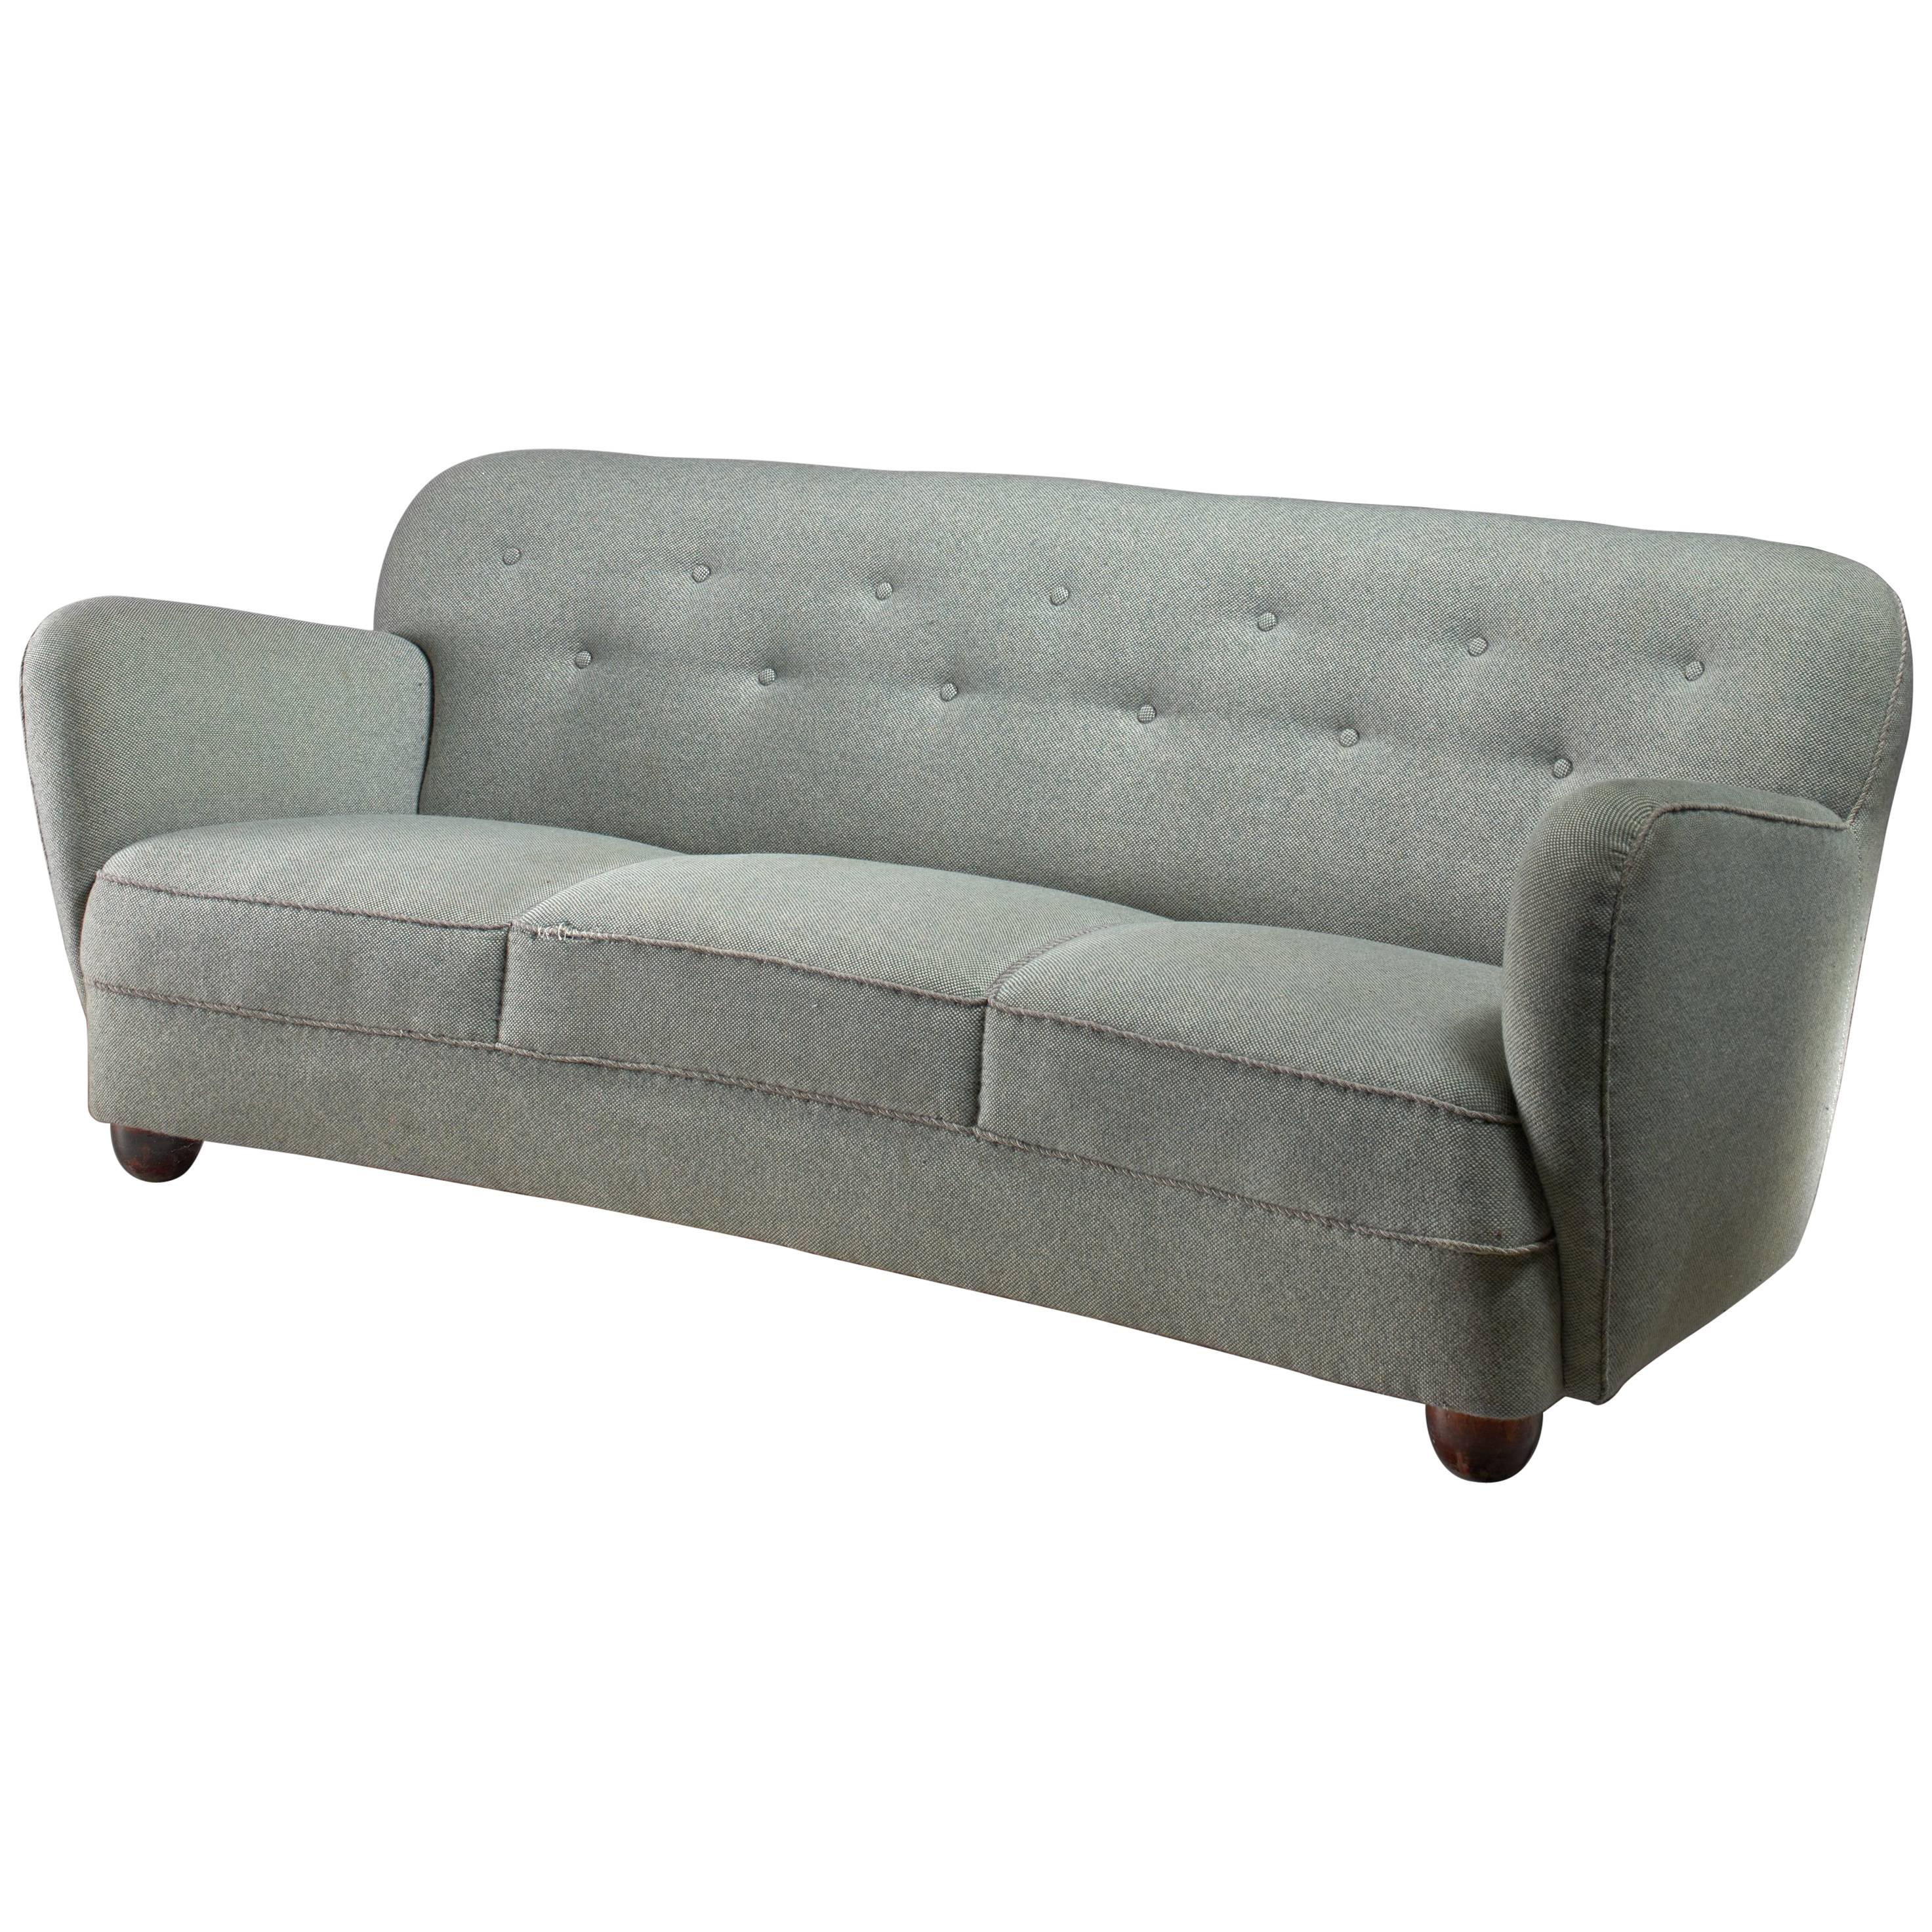 Curved Three-Seat Sofa with Light Blue Fabric Upholstery, Denmark, 1930s For Sale